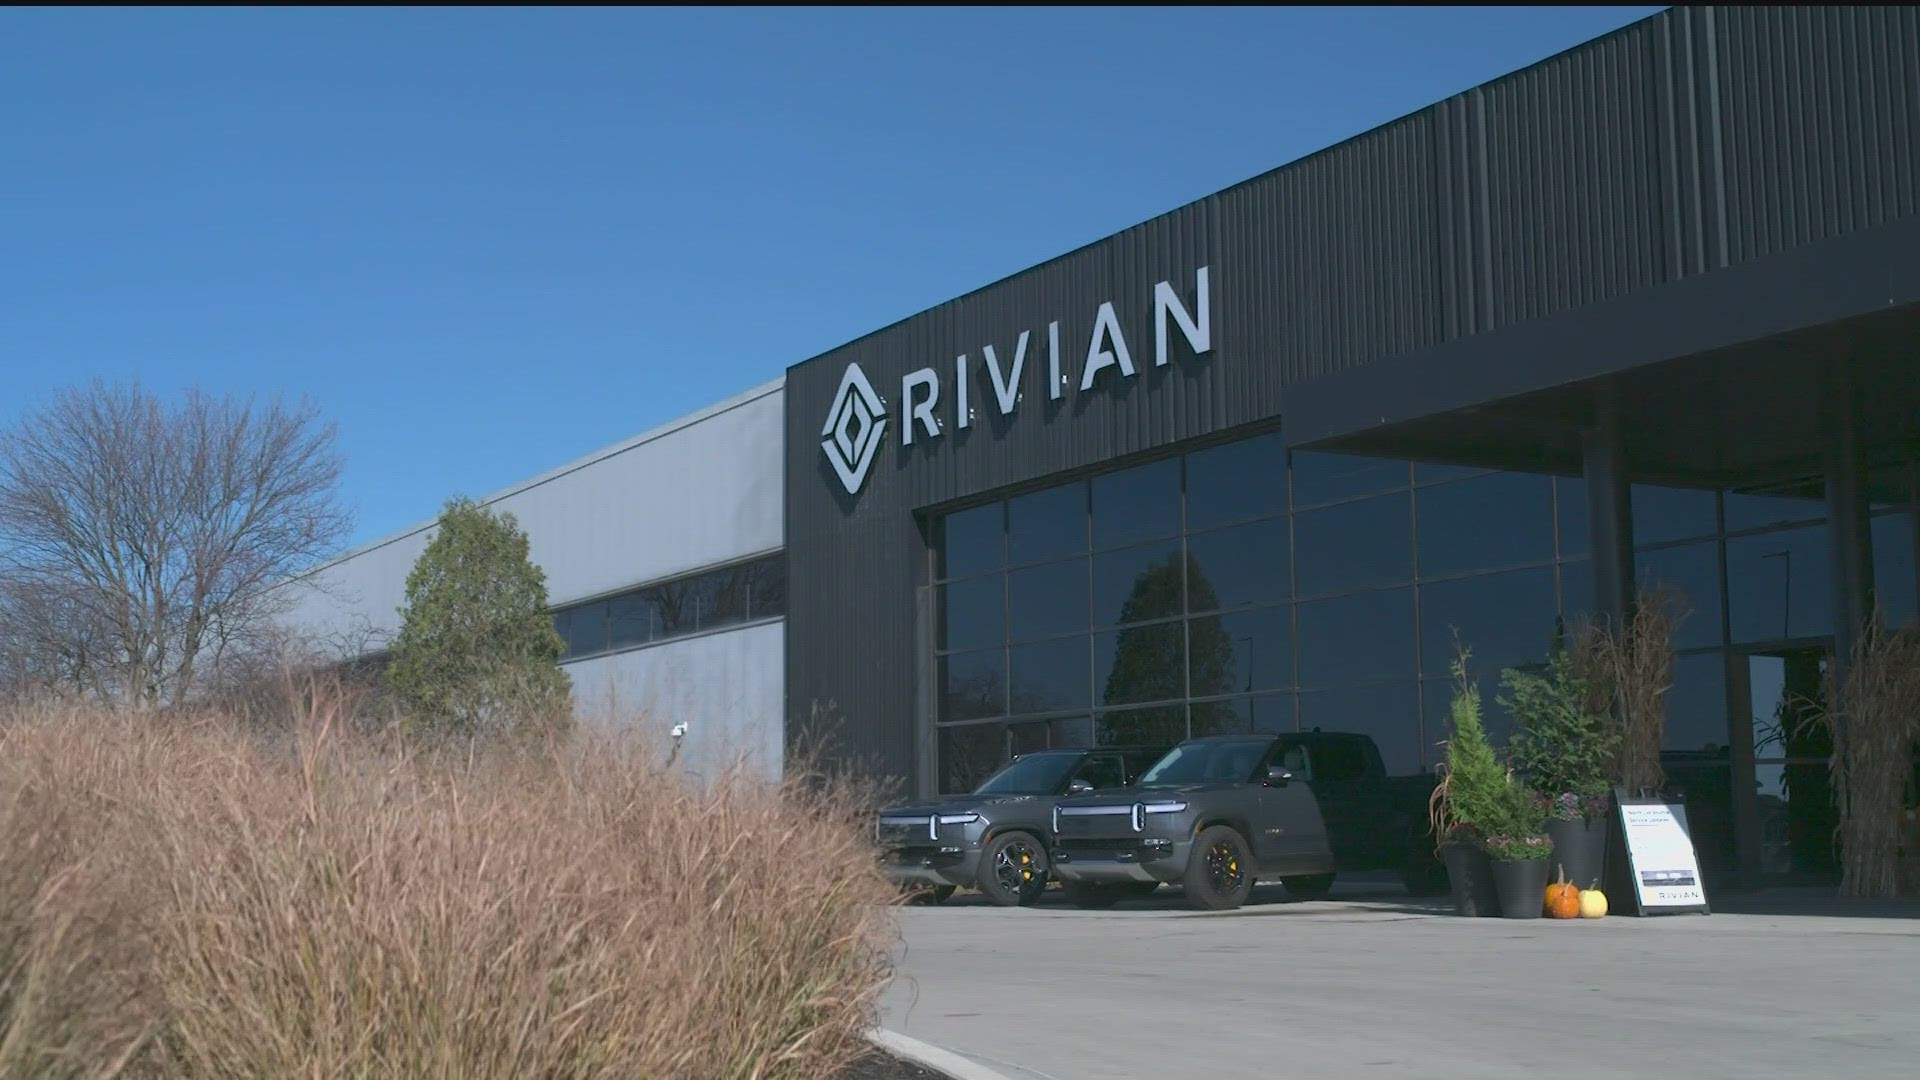 Last week, Rivian announced it would pause construction and now a lot of people are wondering if that money will go to waste.